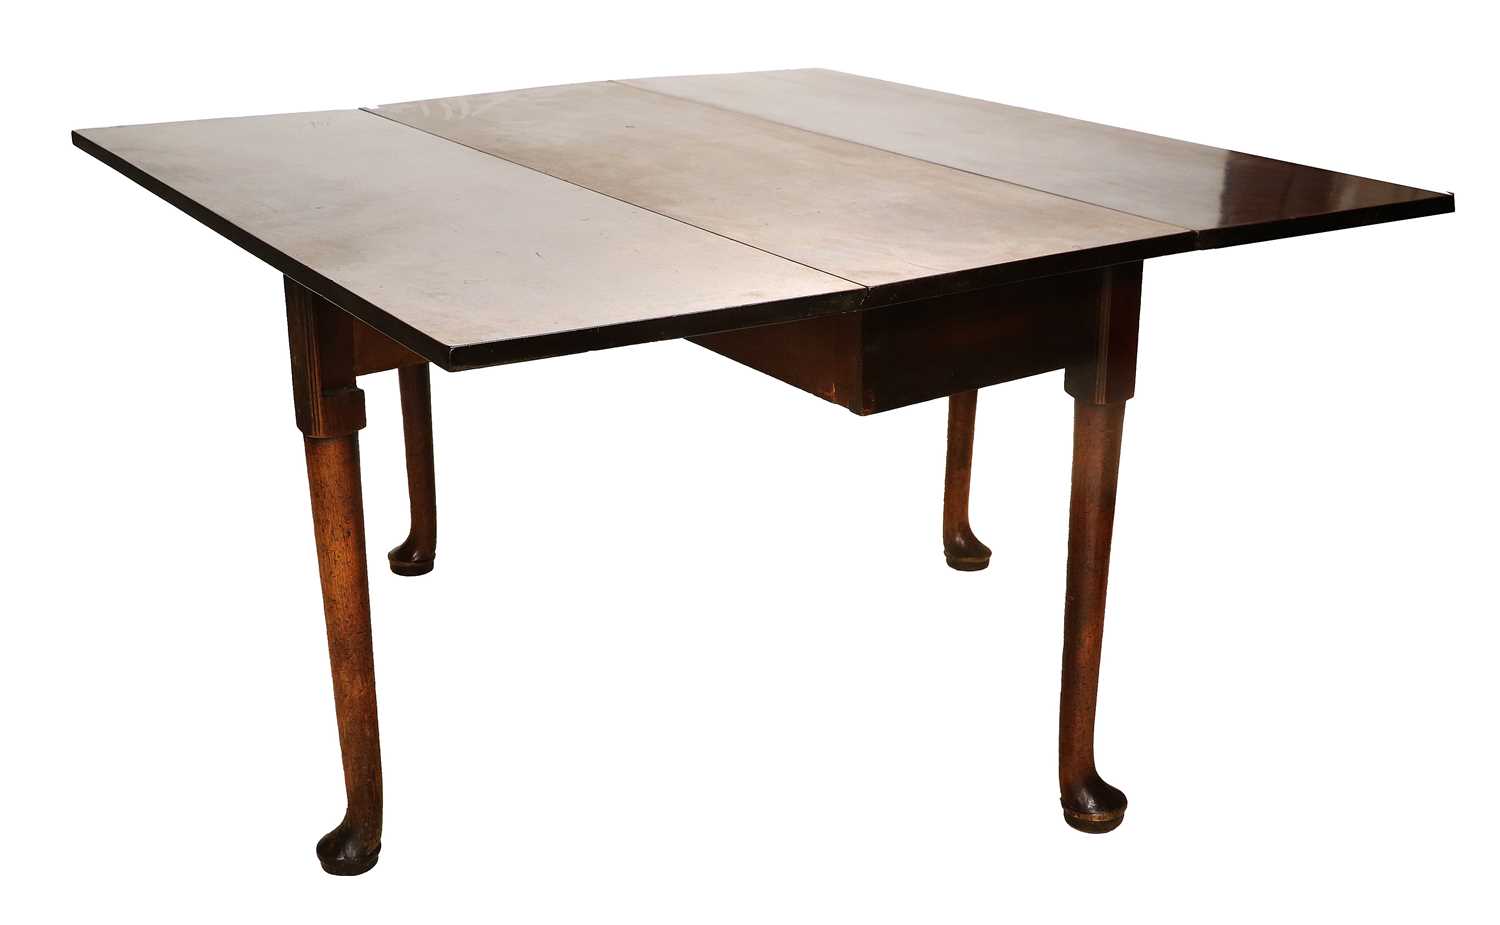 A George III Mahogany Dropleaf Dining Table, 3rd quarter 18th century, with two rectangular leaves